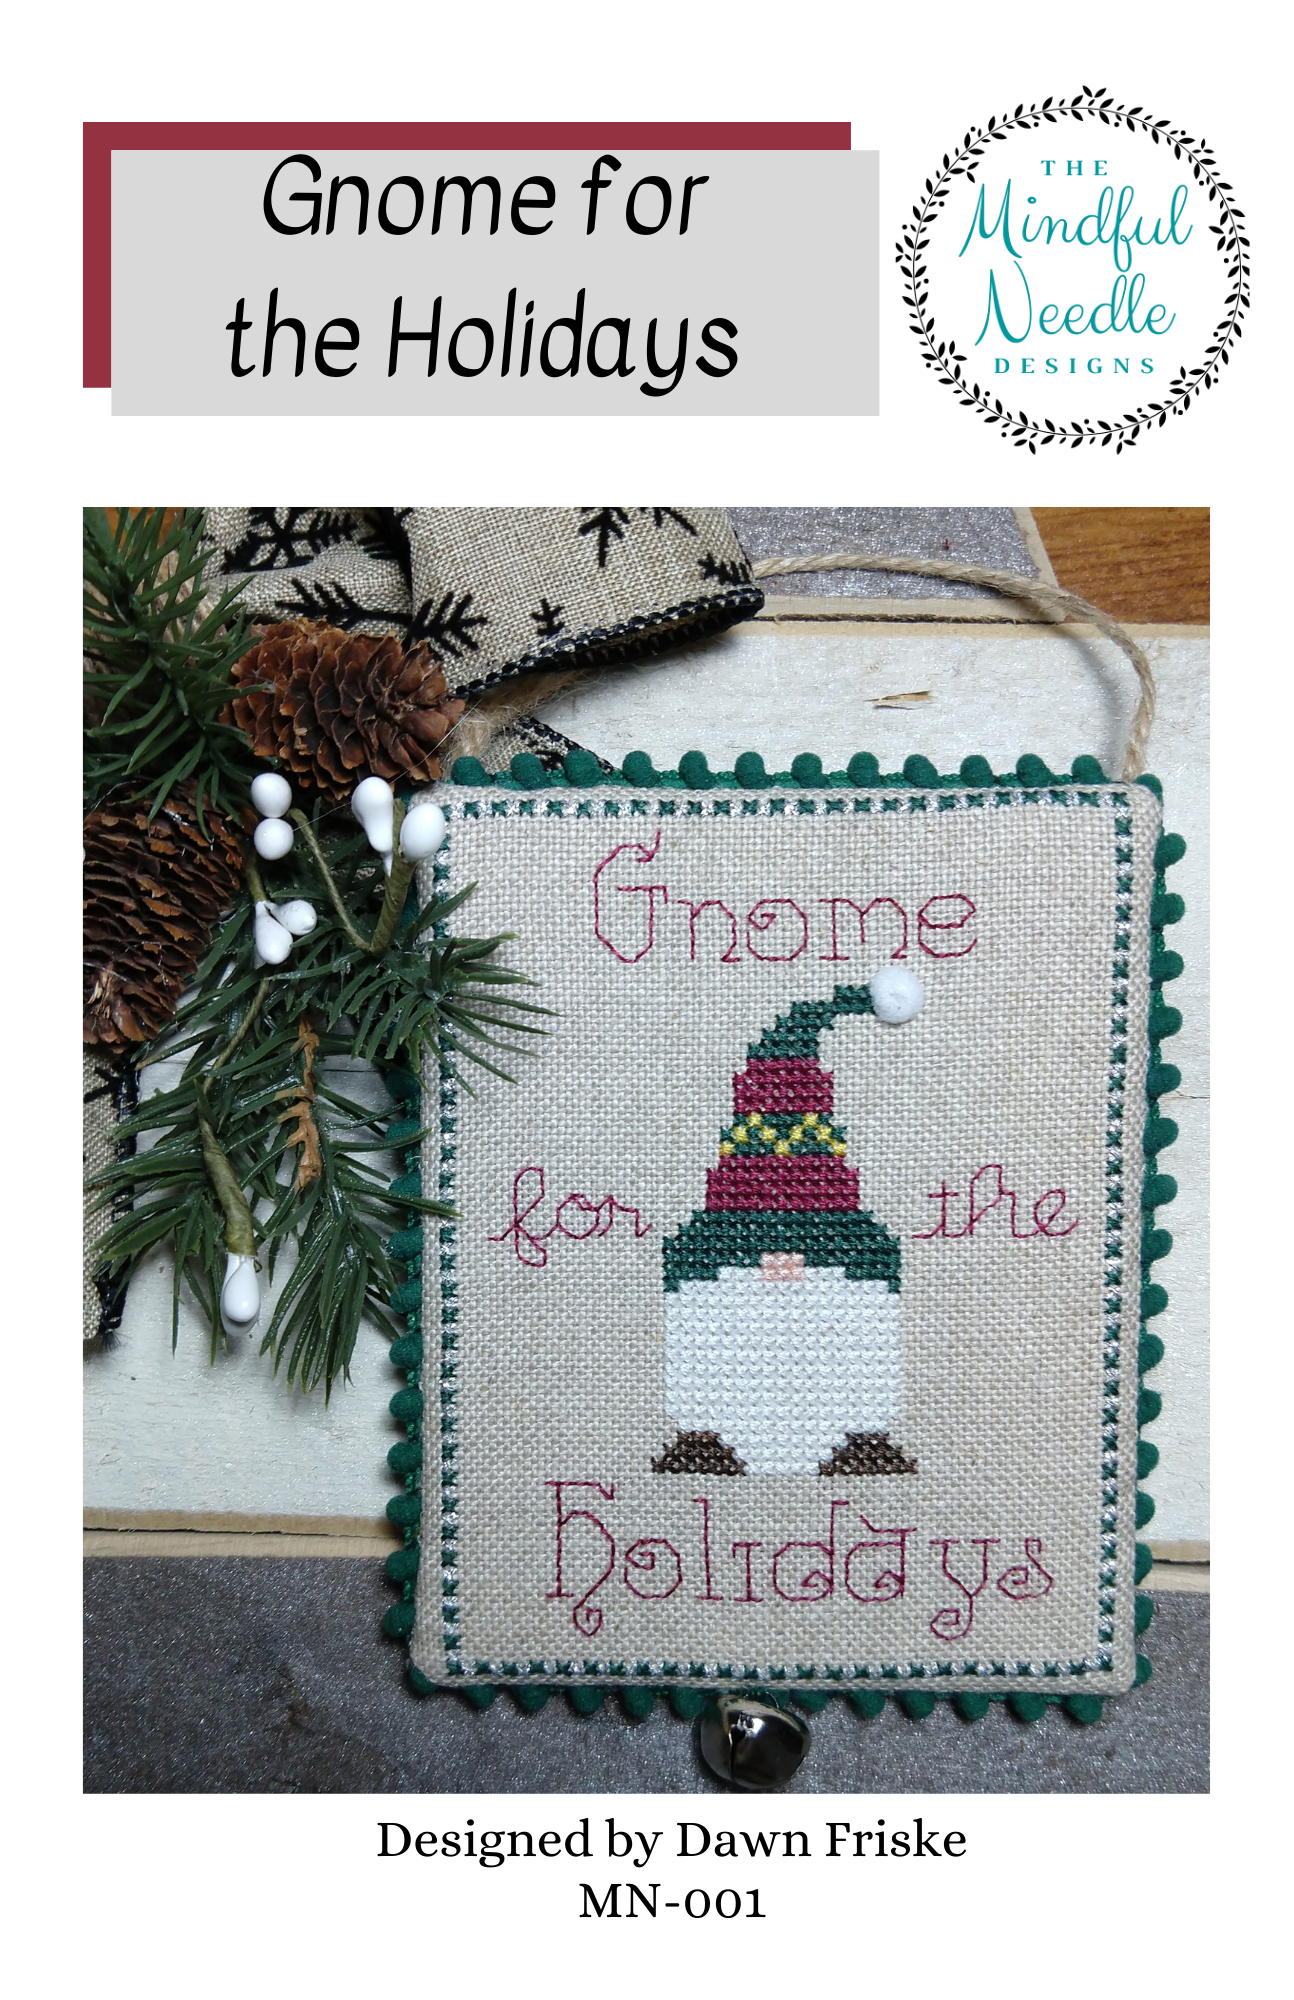 Gnome for the Holidays by the Mindful needle